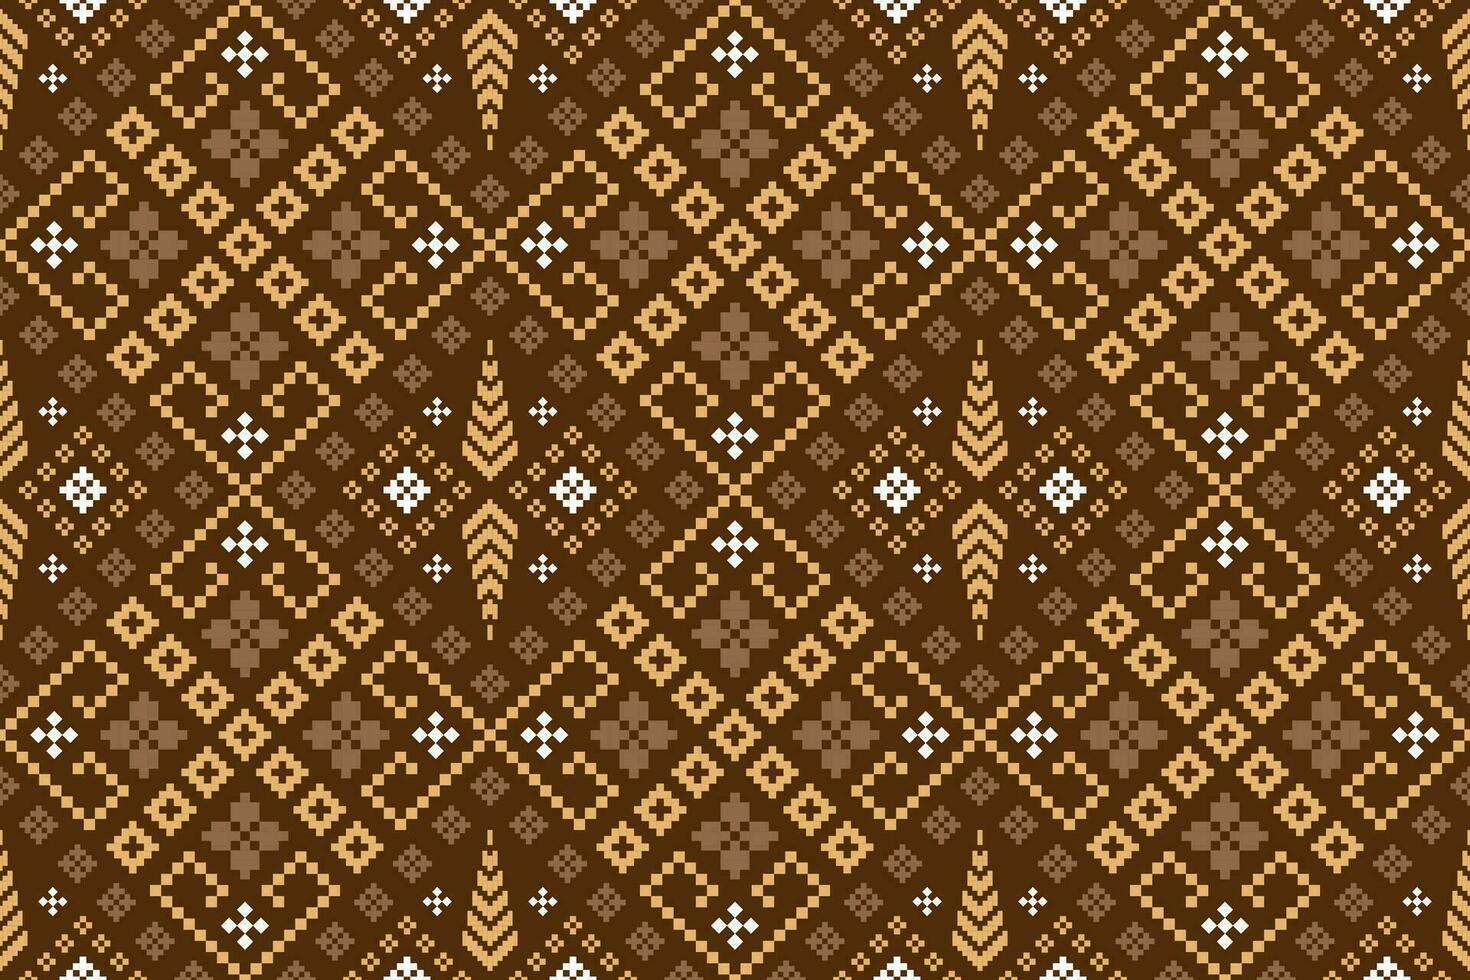 Nature vintages cross stitch traditional ethnic pattern paisley flower Ikat background abstract Aztec African Indonesian Indian seamless pattern for fabric print cloth dress carpet curtains and sarong vector